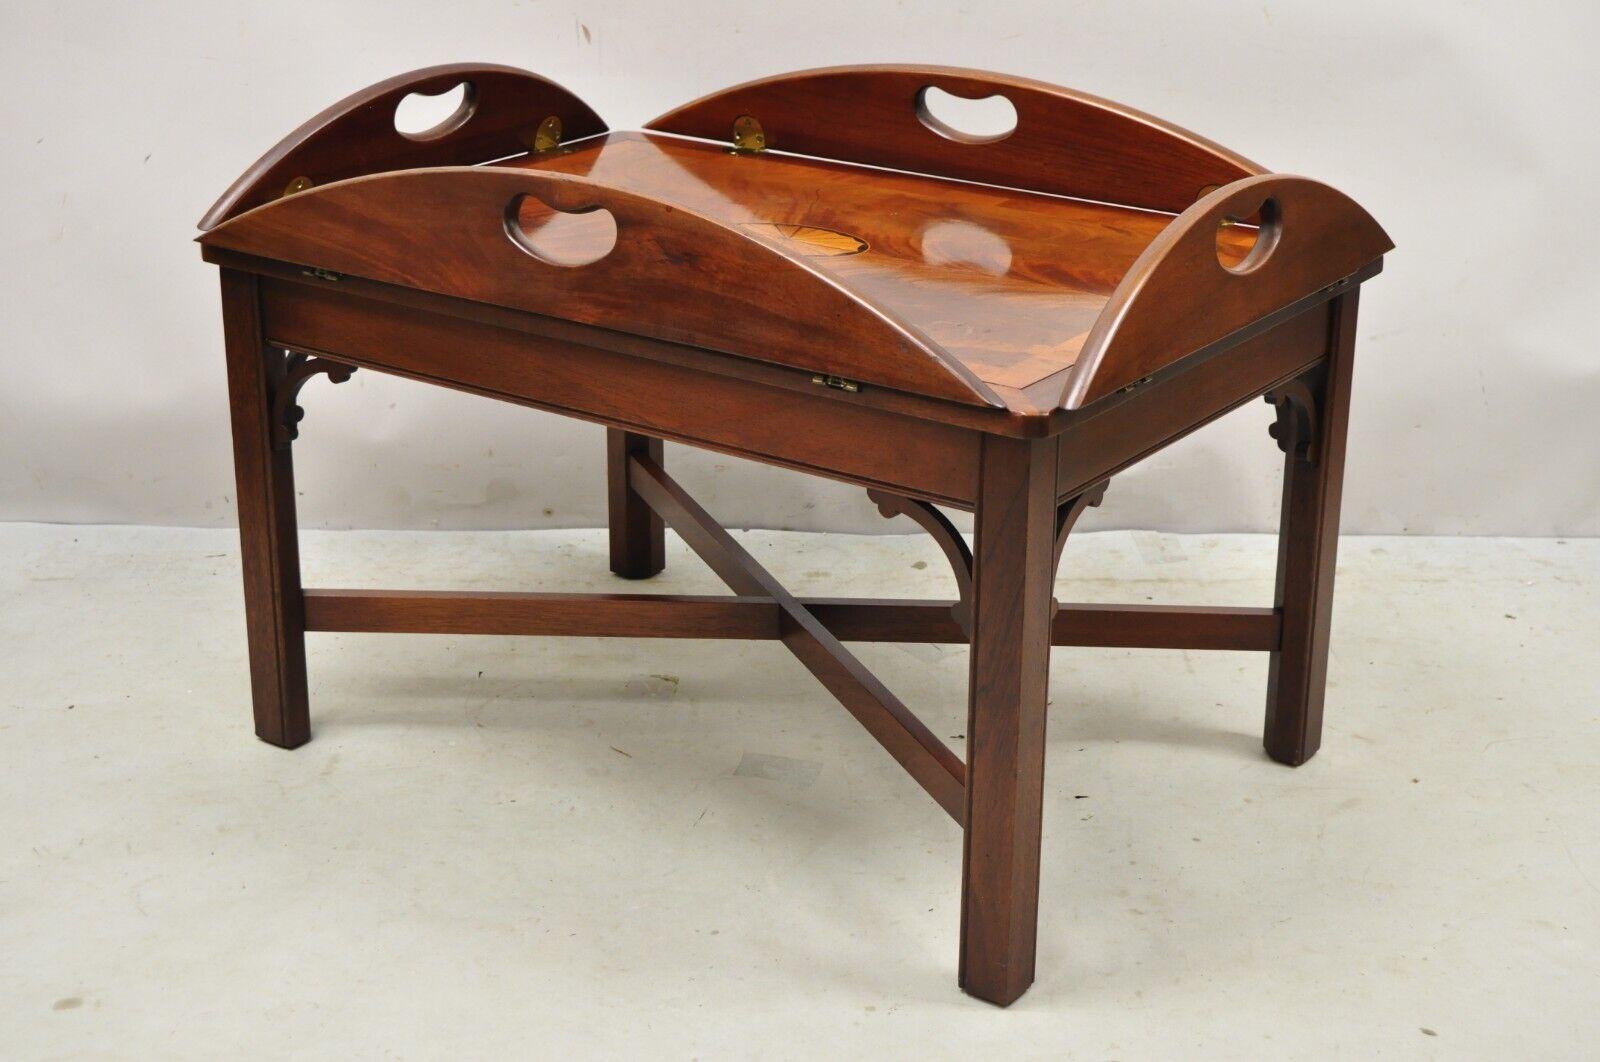 Vintage Hekman Butlers Tray Table Mahogany Coffee Table w/ Pinwheel Inlay.
Item features a pinwheel inlay top, fold down sides, beautiful wood grain, original stamp, quality American craftsmanship, great style and form. Circa Late 20th Century.